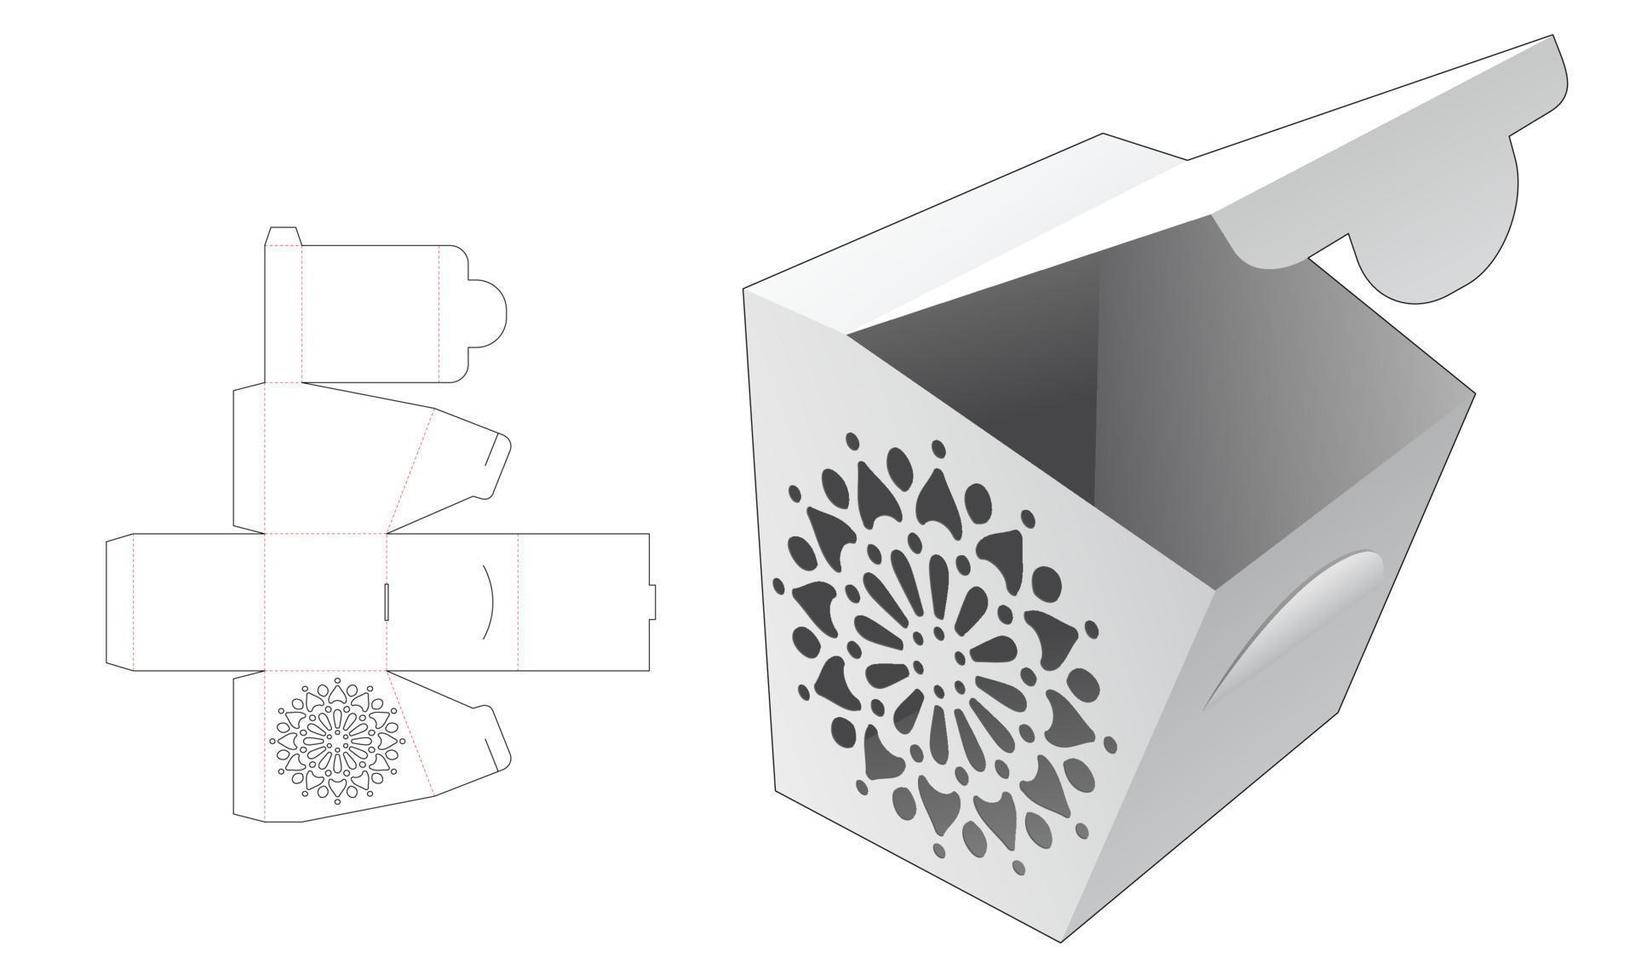 Cardboard locked point flip box with steciled mandala die cut template and 3D mockup vector